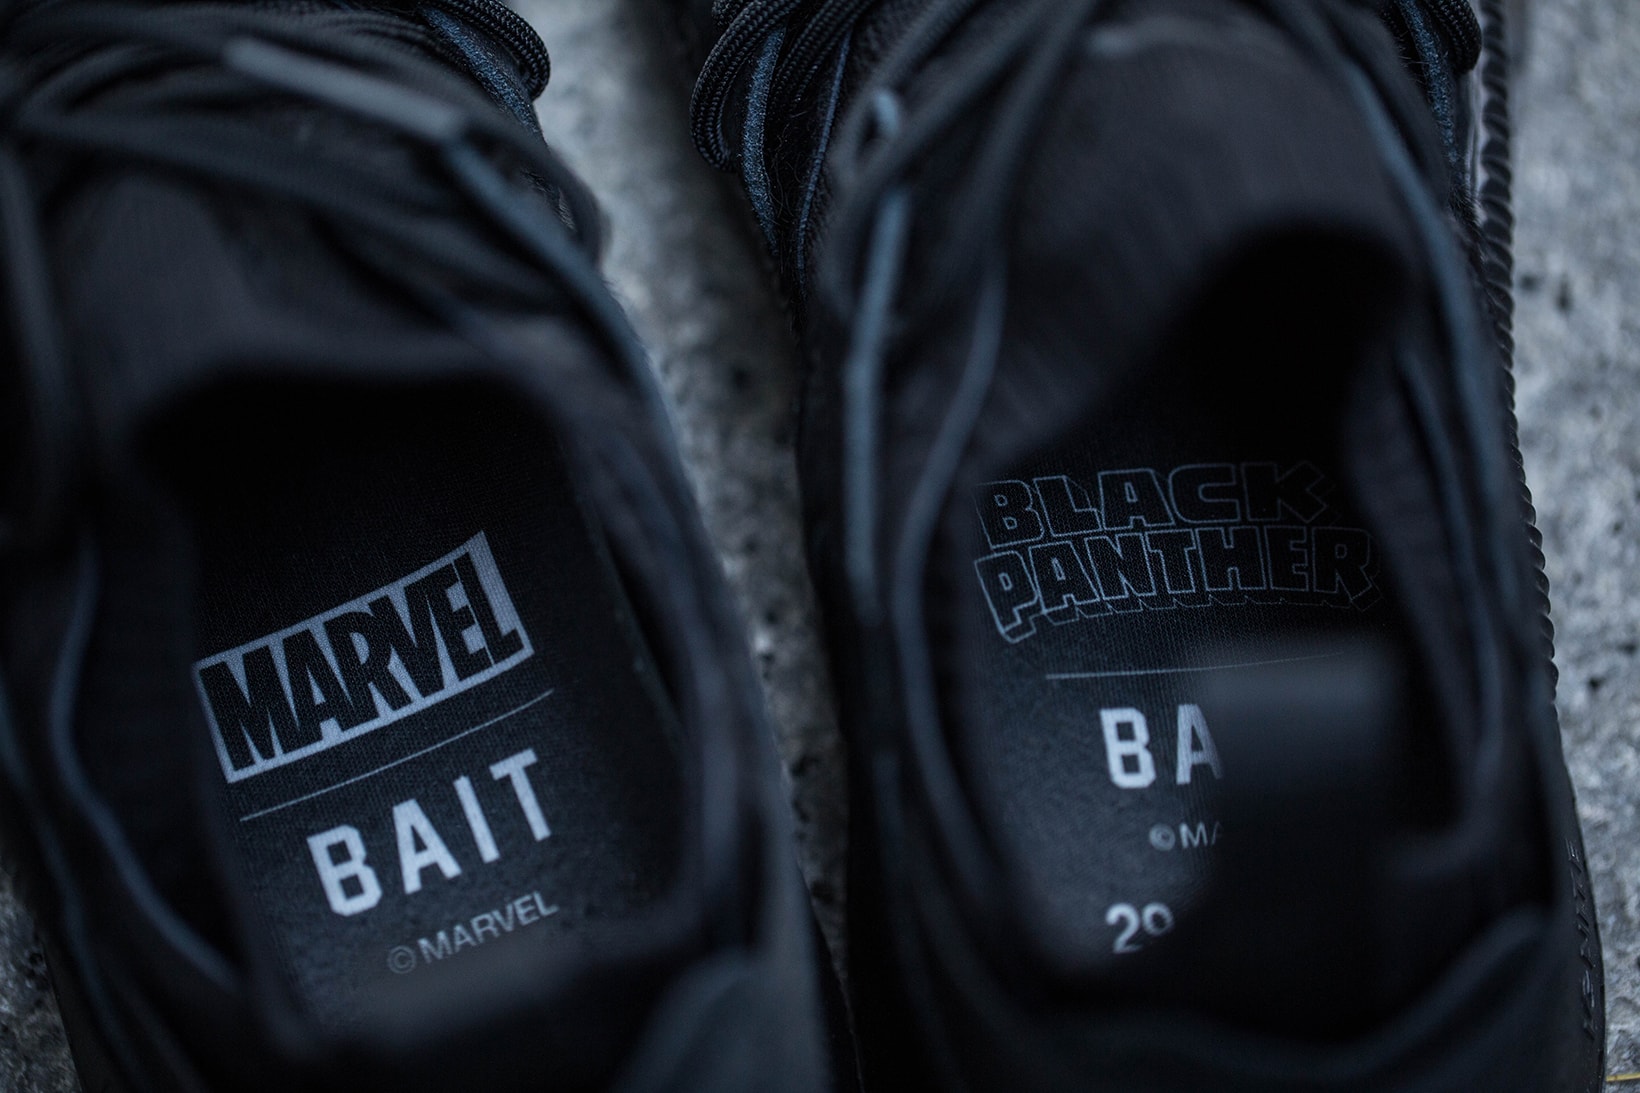 BAIT PUMA Black Panther Pack Tsugi BOG Blaze of Glory Mostro Mid 2018 february release date info sneakers shoes footwear